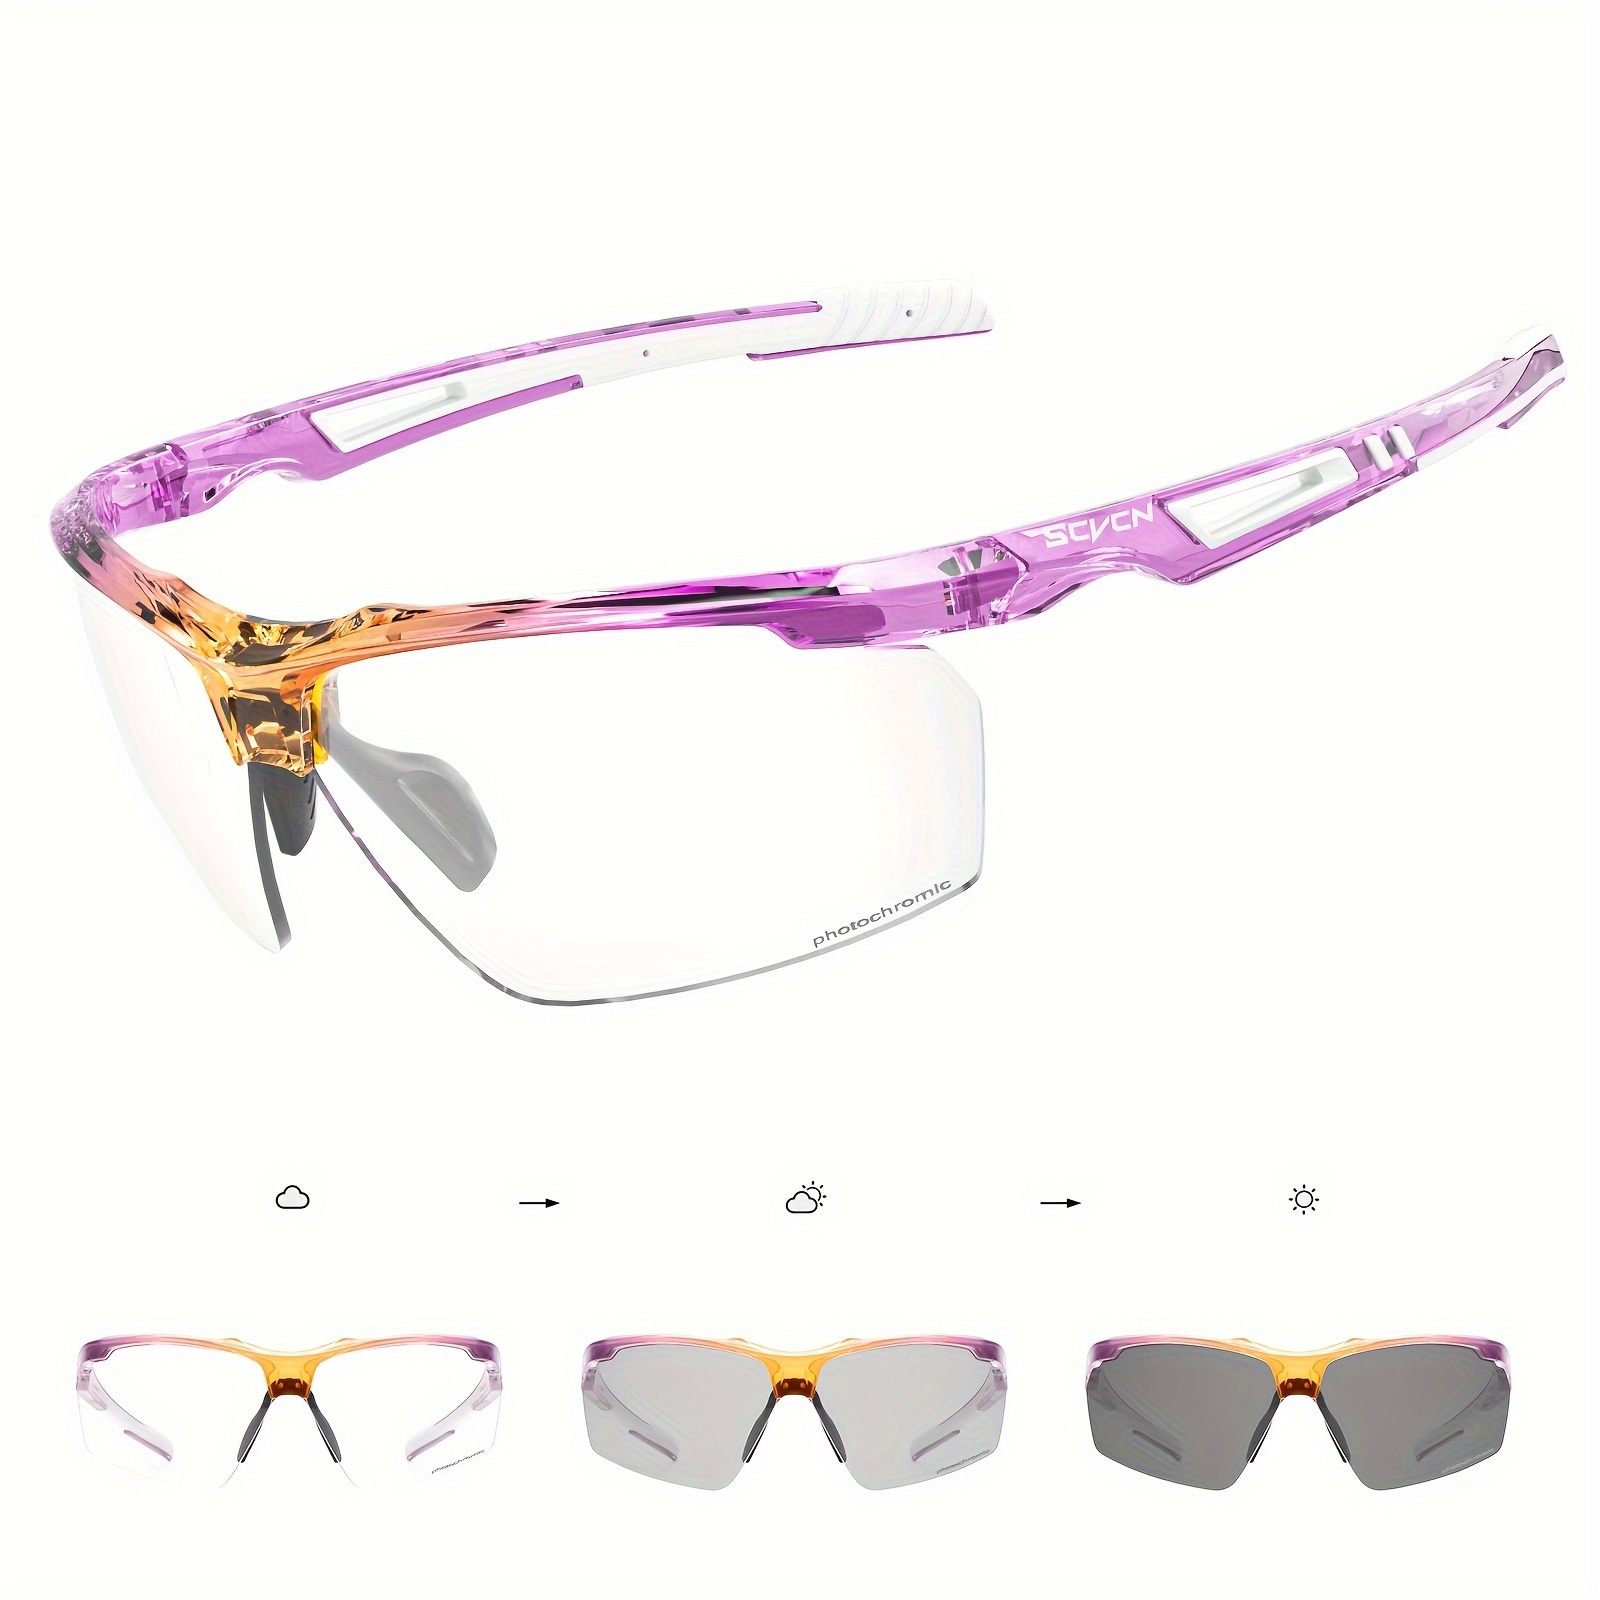 Photochromic Cool Colorful Cycling Sunglasses Outdoor Sports